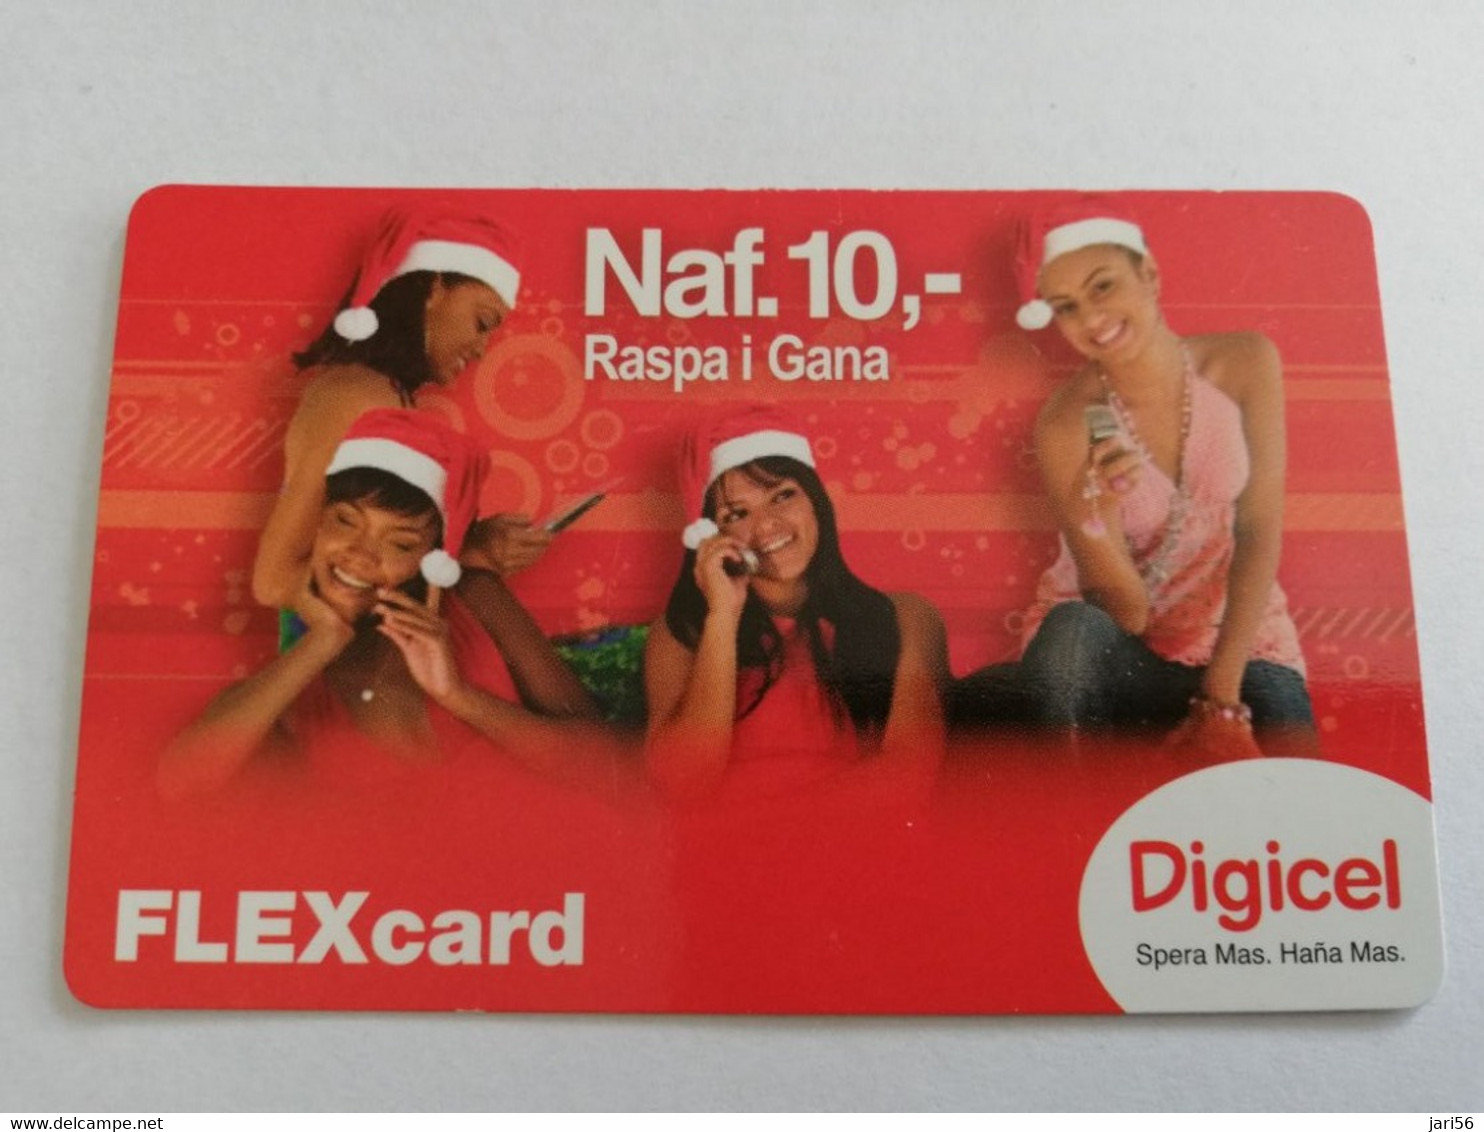 CURACAO  DIGICEL FLEX CARD  NAF 10,-  CHRISTMAS LADYS WITH PHON   DATE 05/09/2009   VERY FINE USED CARD     ** 5293AA** - Antilles (Netherlands)